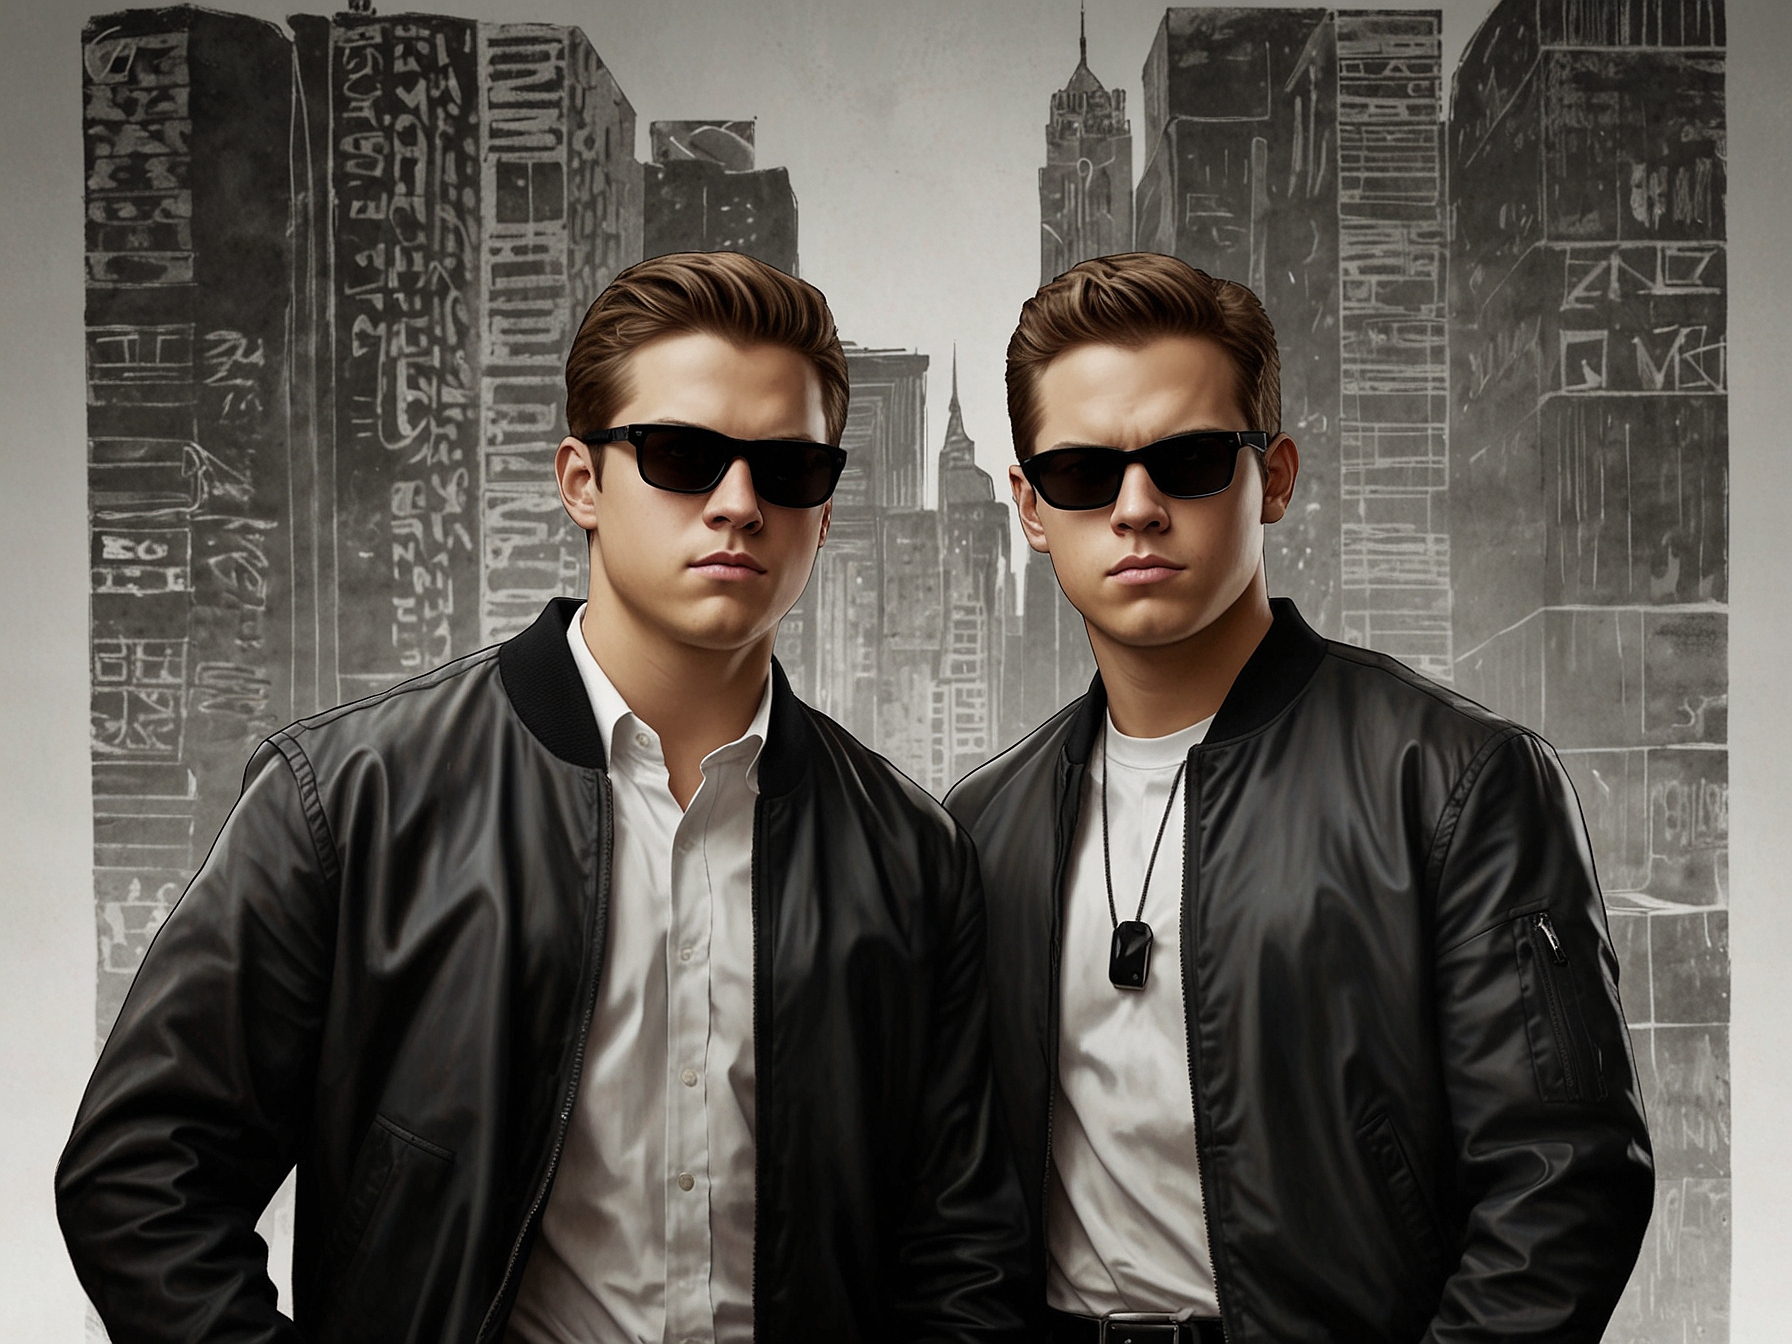 A graphic depicting a split screen with 'Jump Street' on one side and 'Men in Black' on the other, symbolizing the creative hurdles in merging both movie worlds into one narrative.